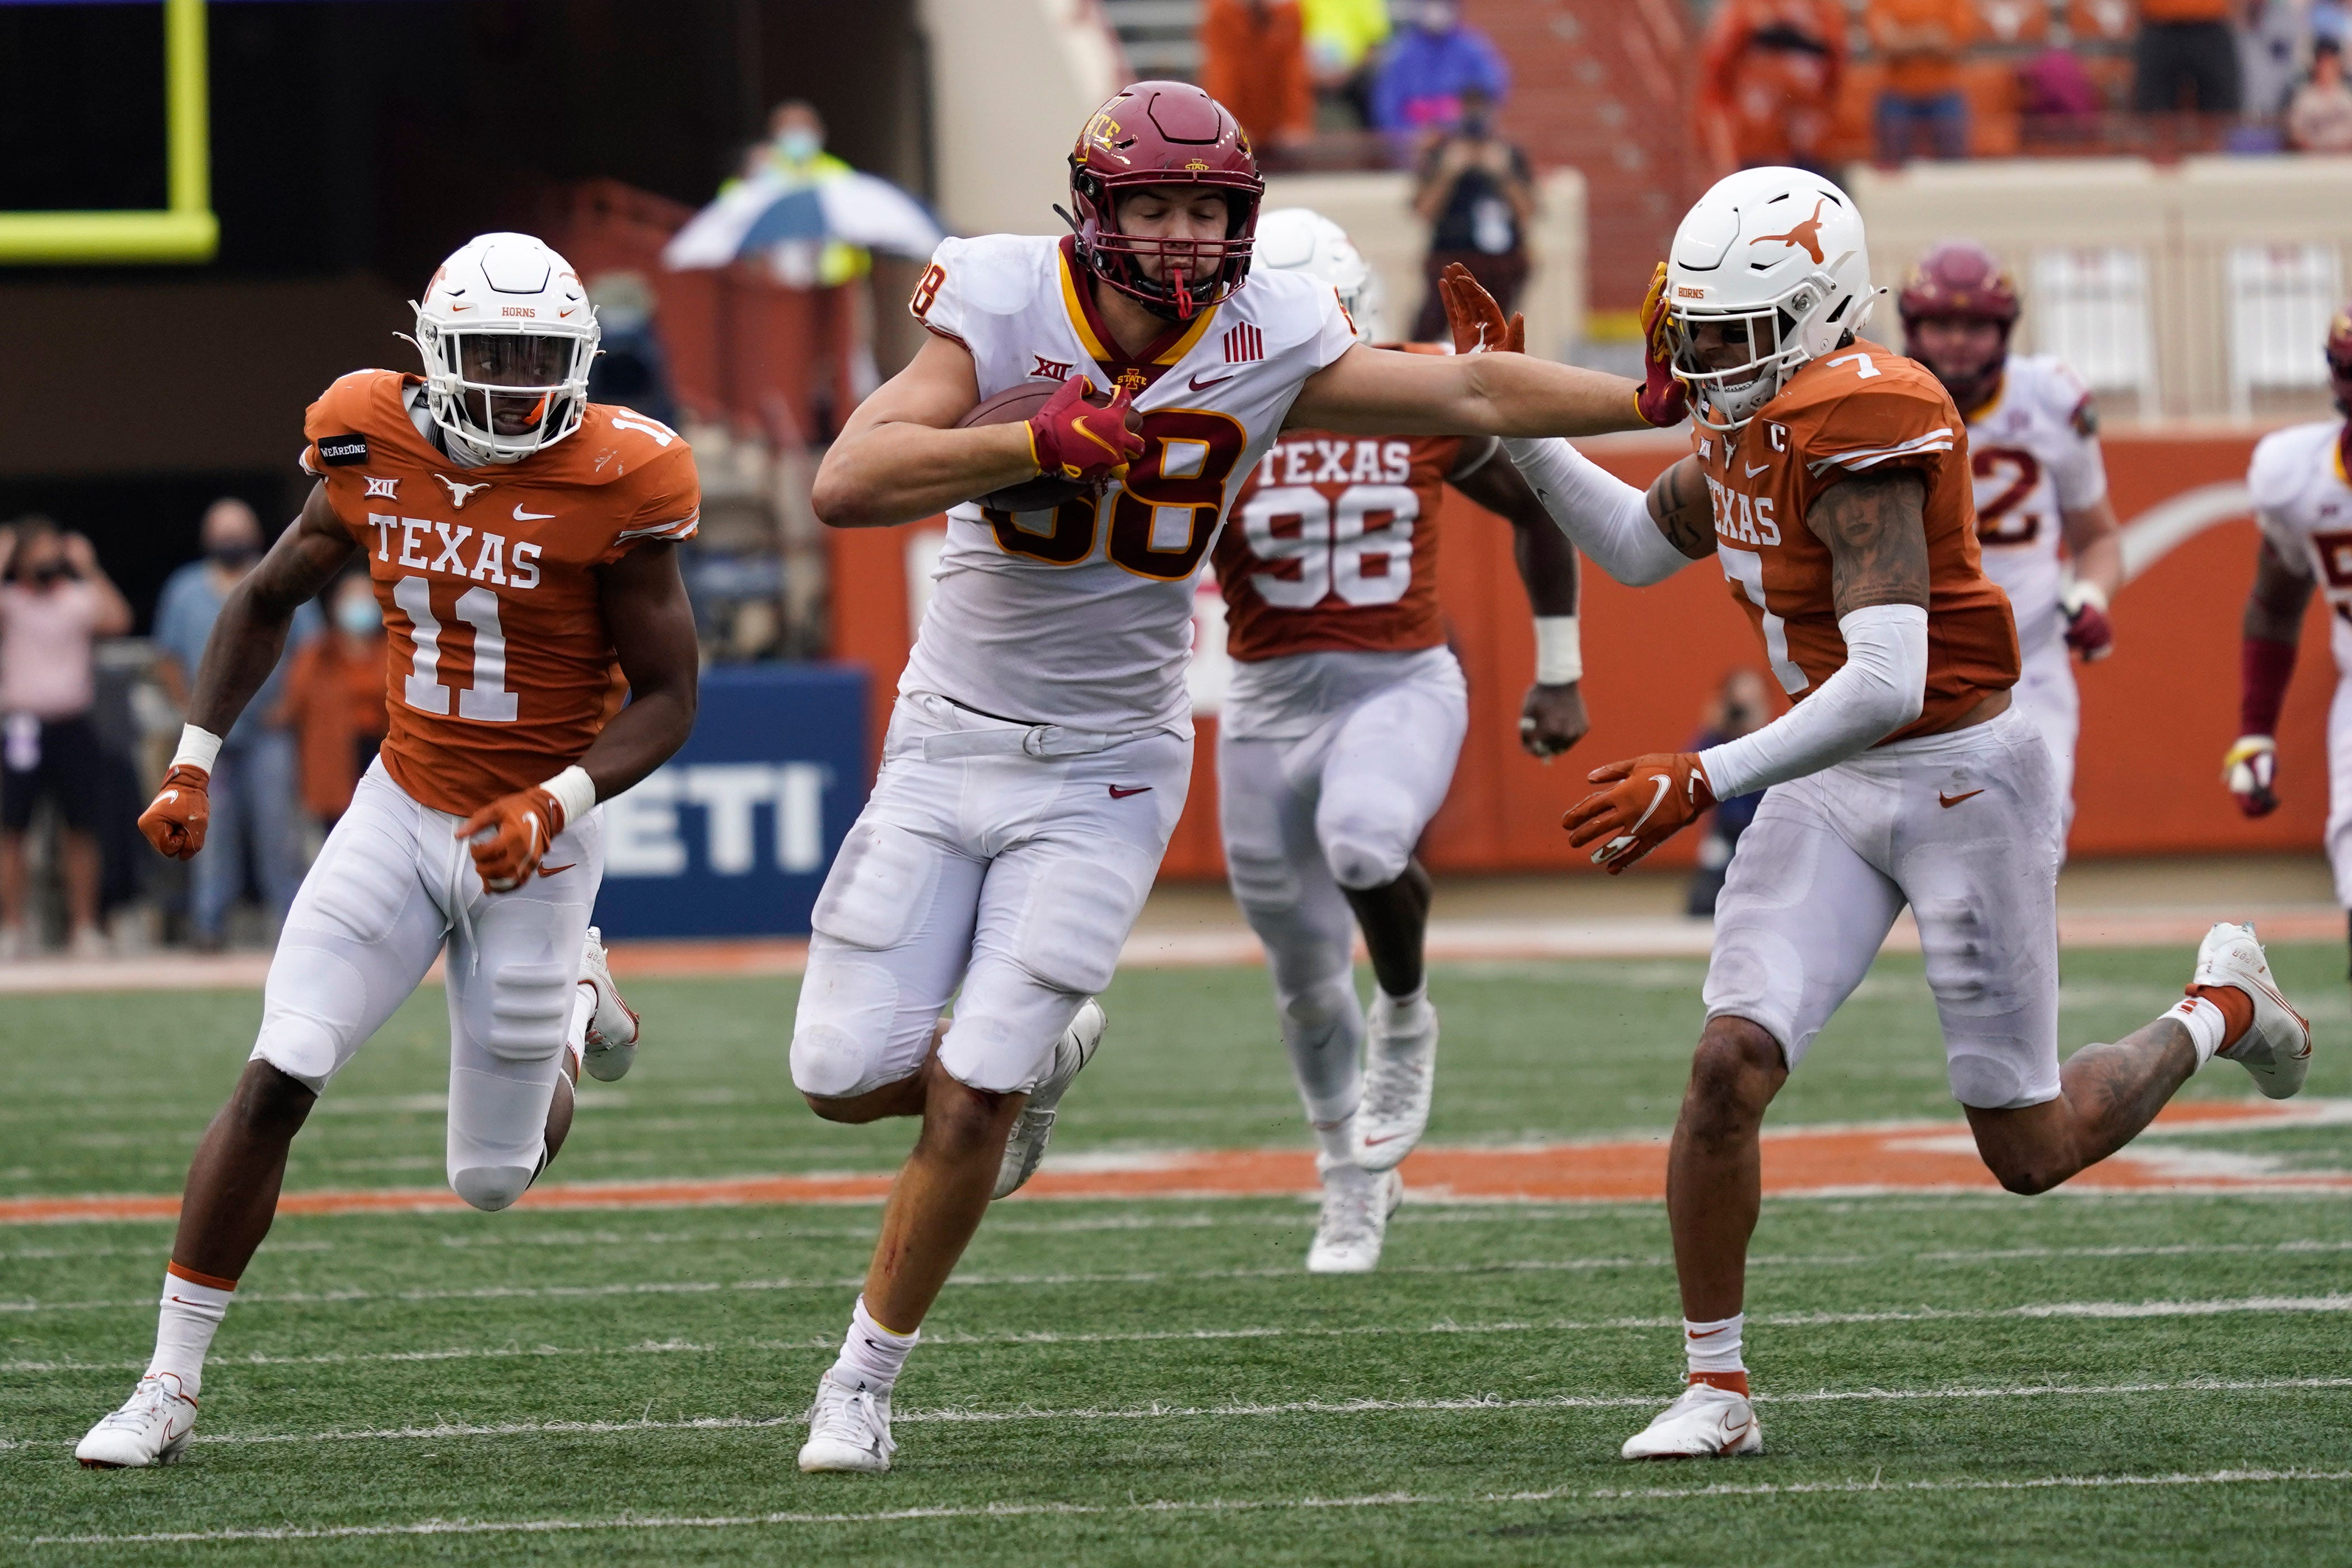 Opinion: No. 15 Iowa State rallies past No. 21 Texas to close in on Big 12 championship game